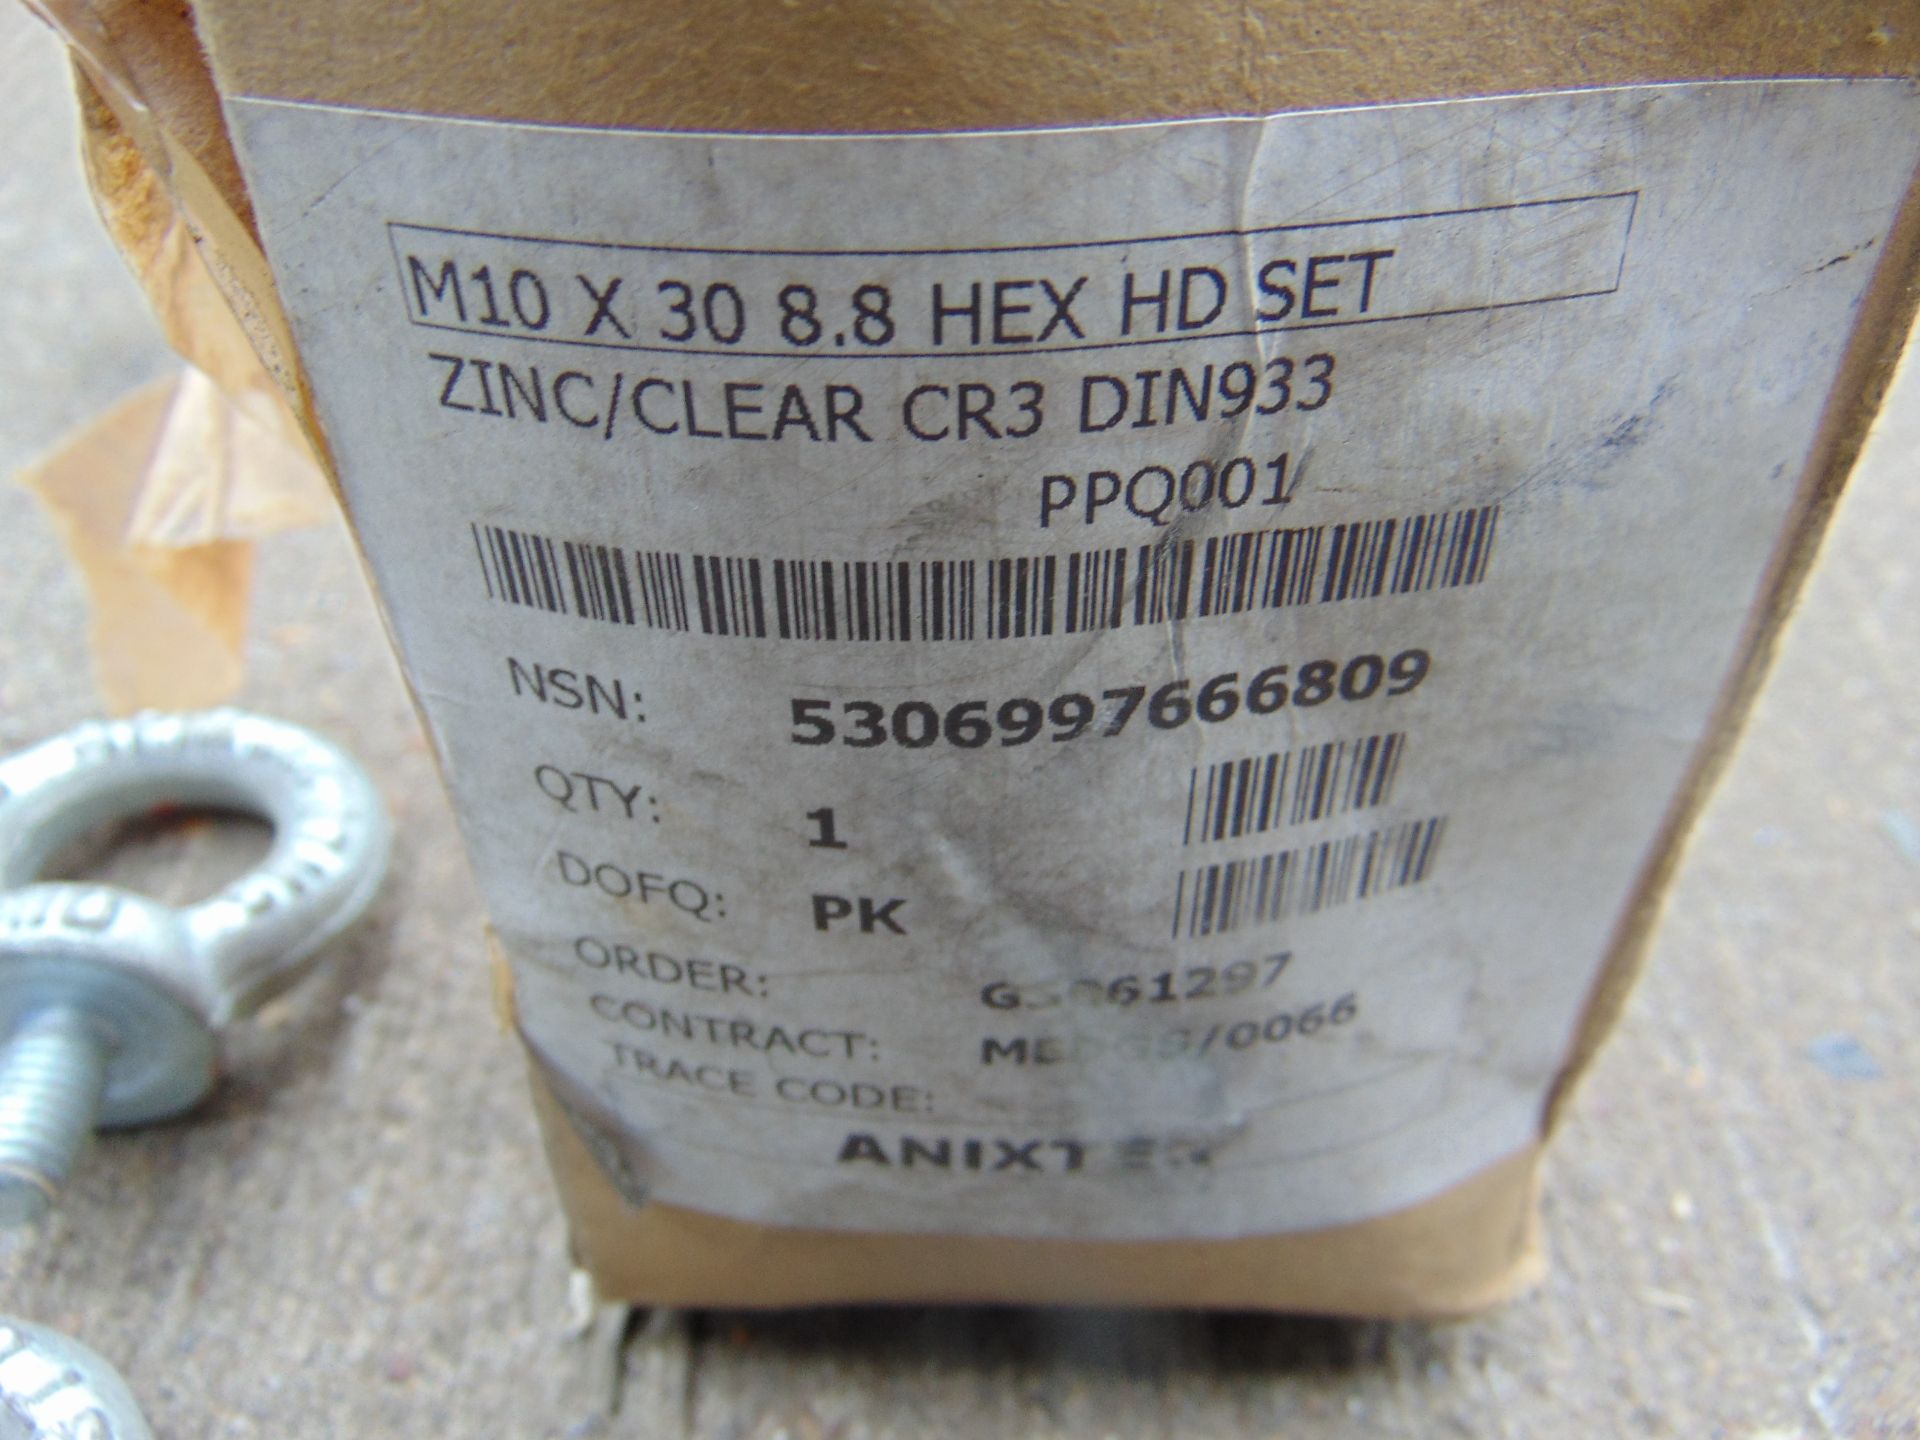 15 x M10 0.23t EYEBOLTS, 3 x WIRE ROPE CLAMPS, 30CWT D SHACKLE AND A BOX OF M10 x 30mm BOLTS - Image 5 of 6